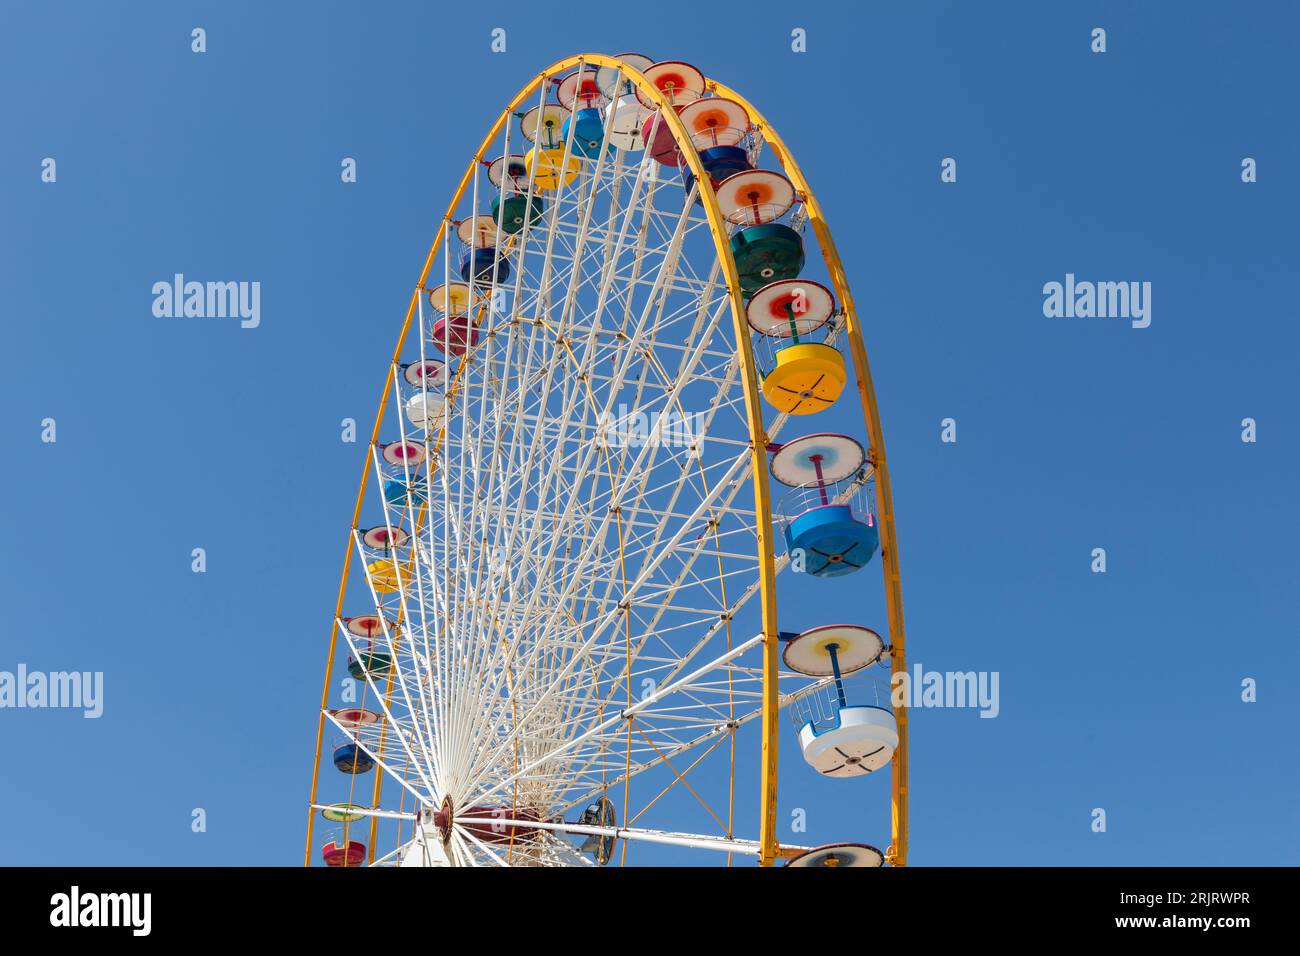 The Ferris Wheel at Le Barcares in the South of France. Stock Photo